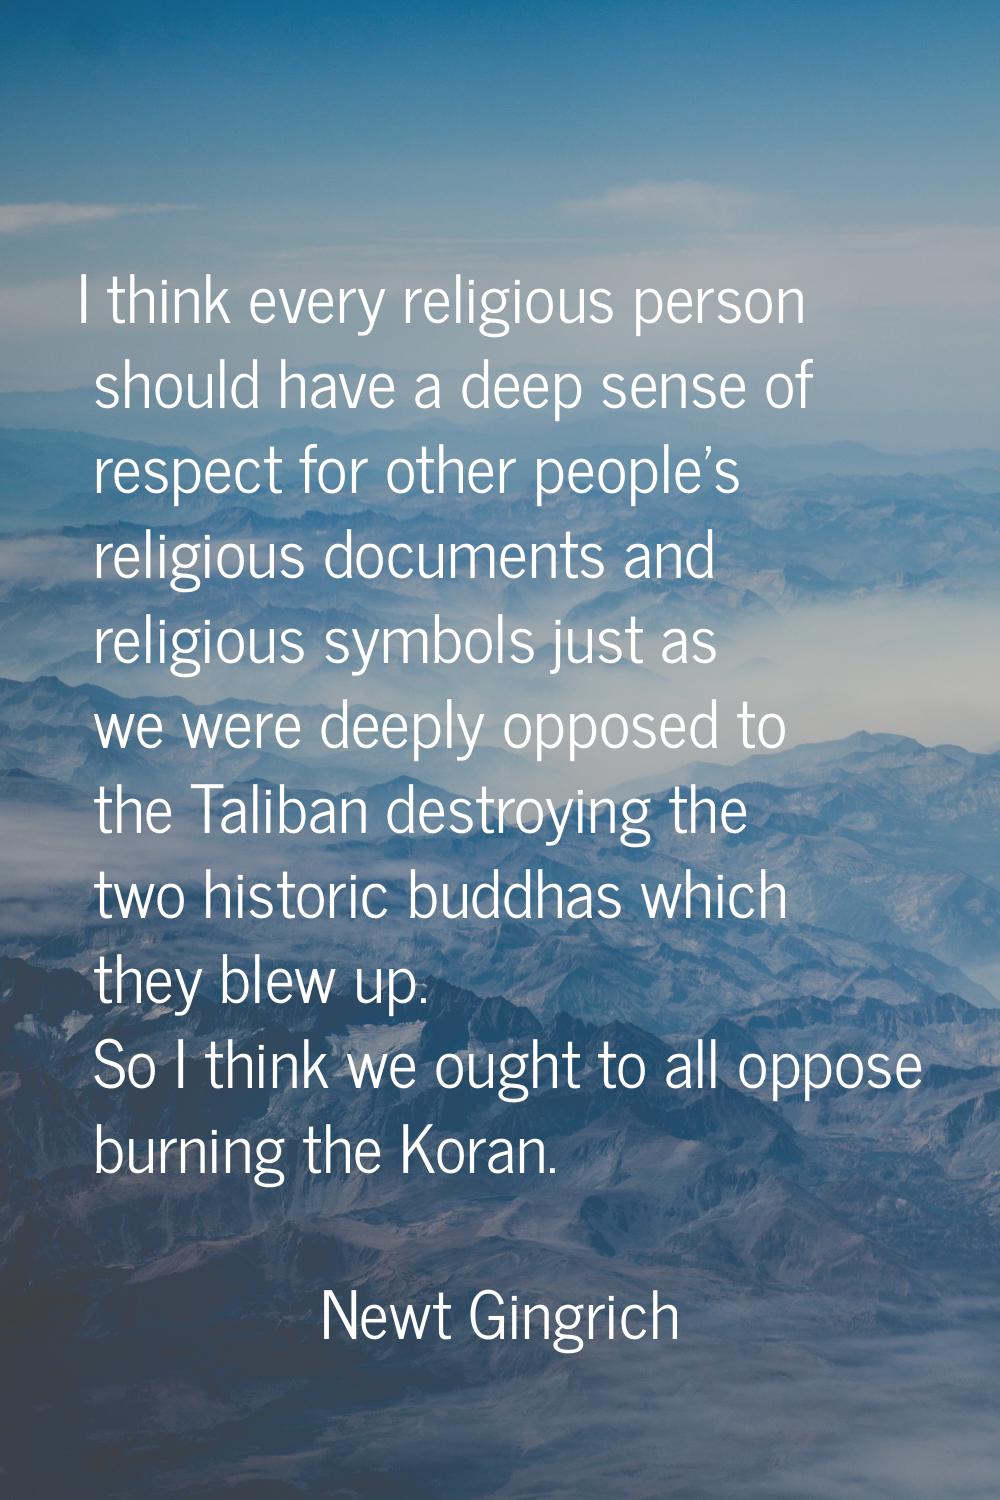 I think every religious person should have a deep sense of respect for other people's religious doc